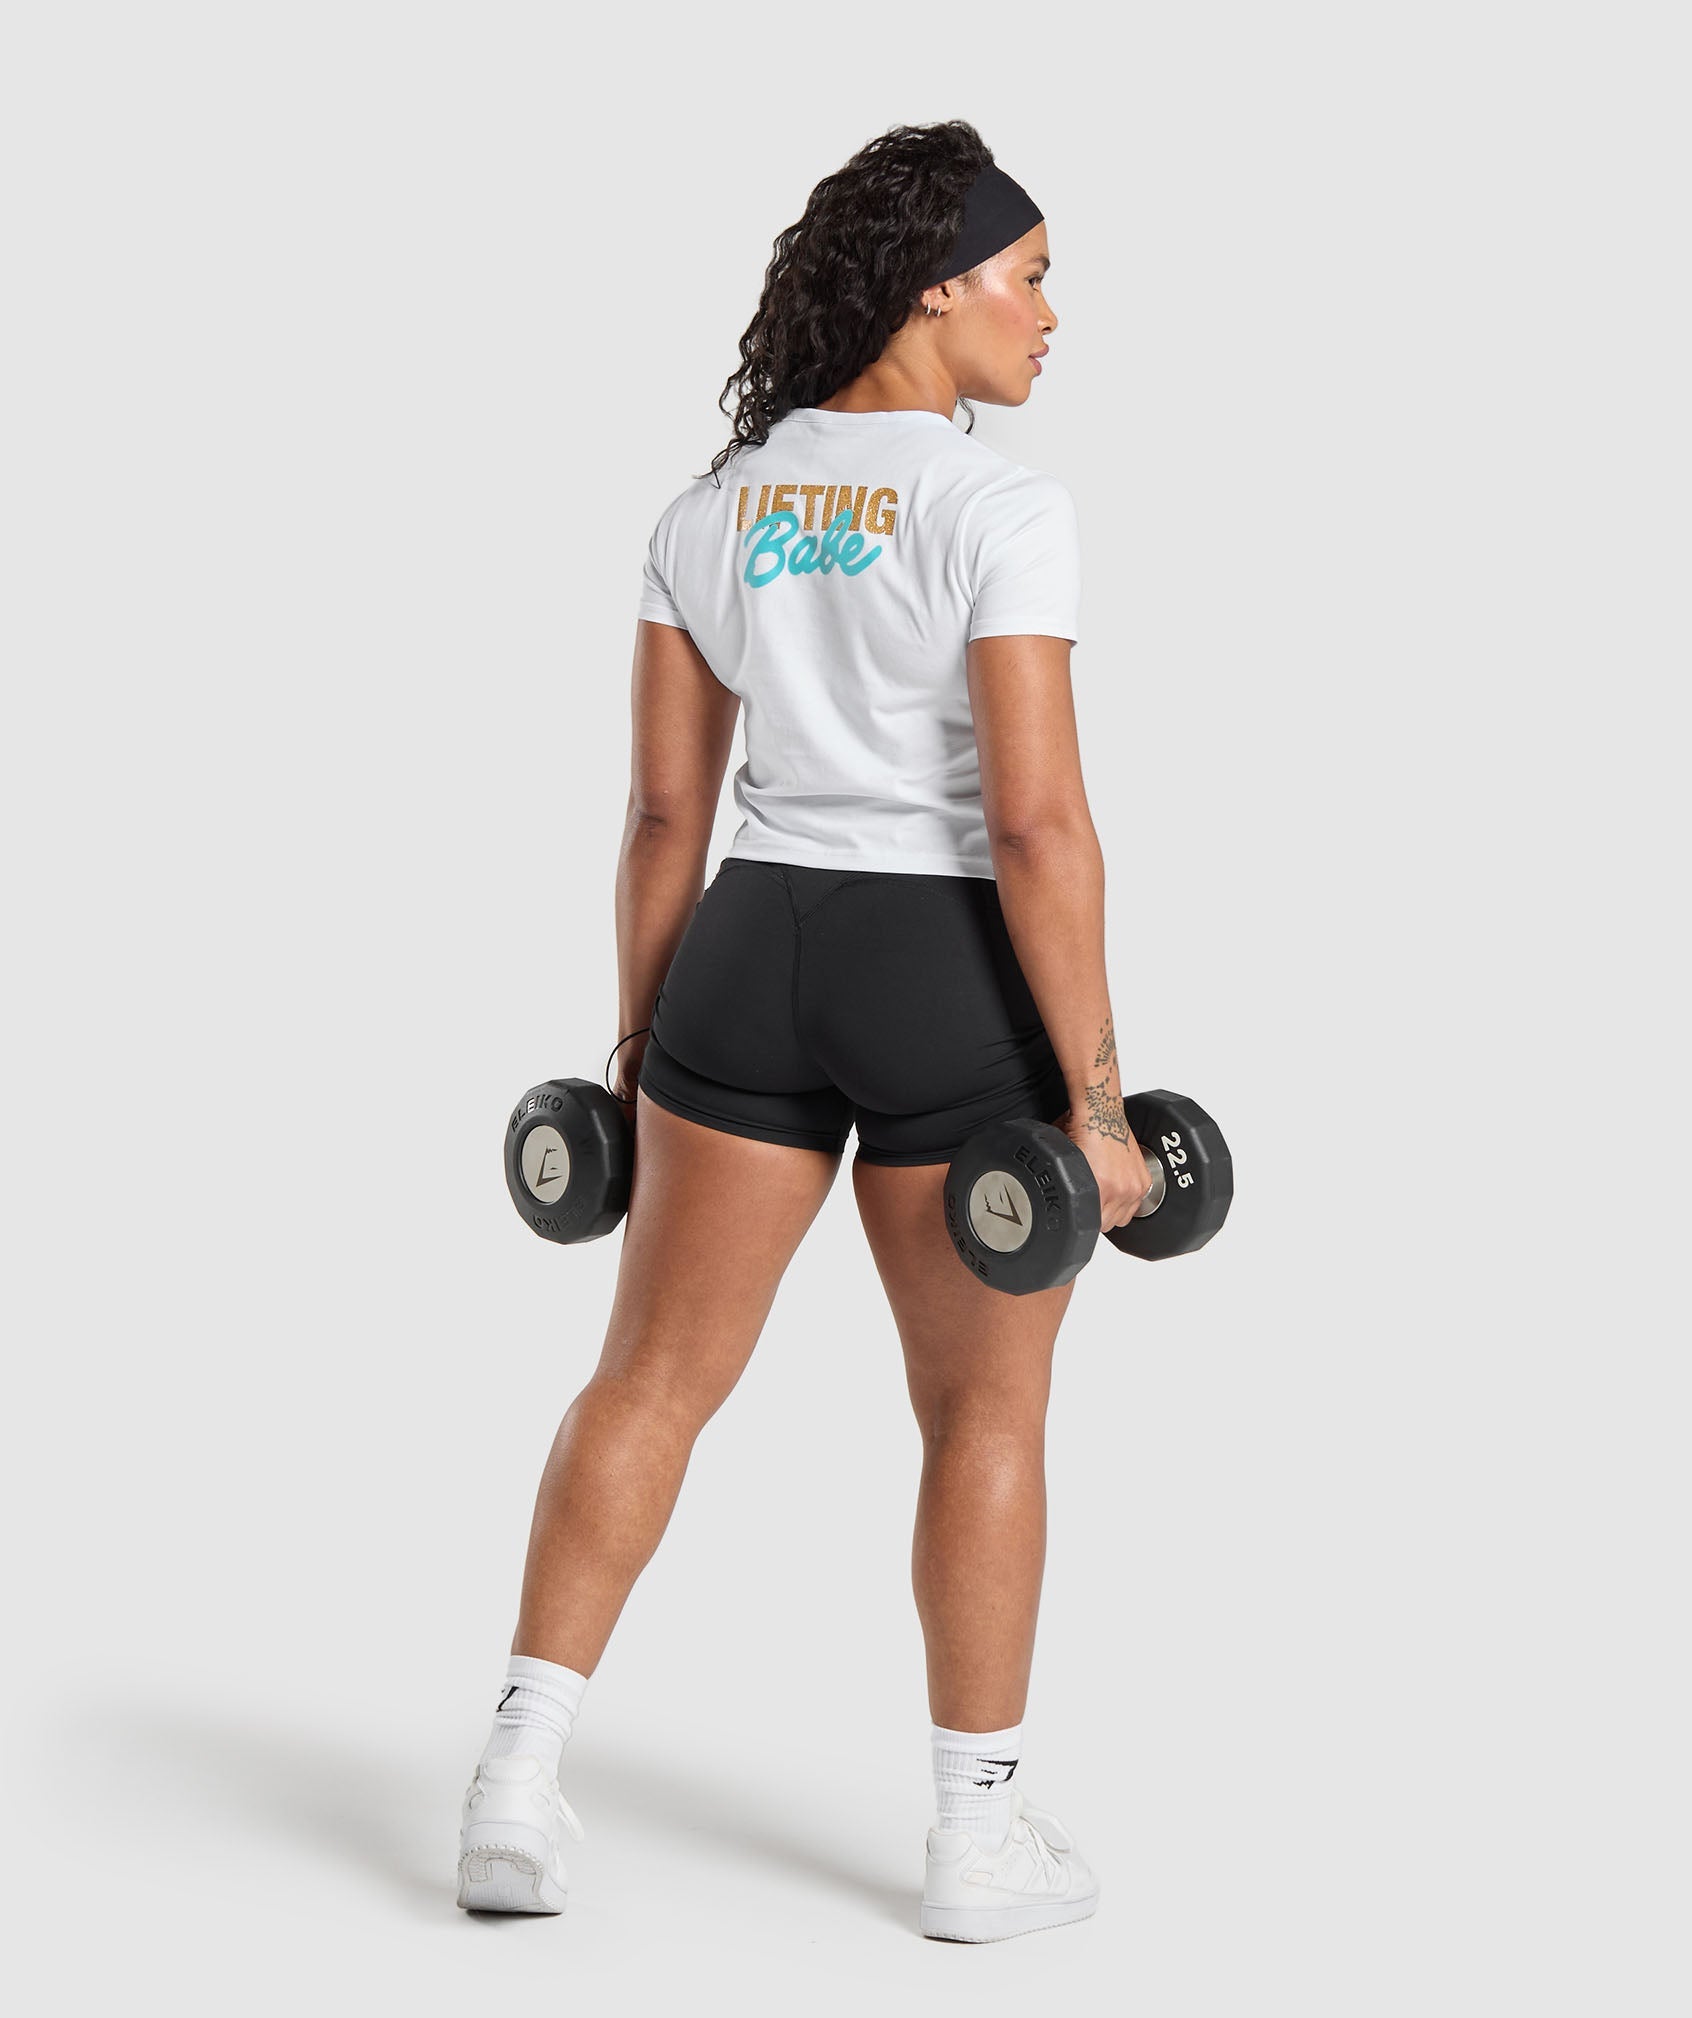 Lifting Babe Tee in White - view 4